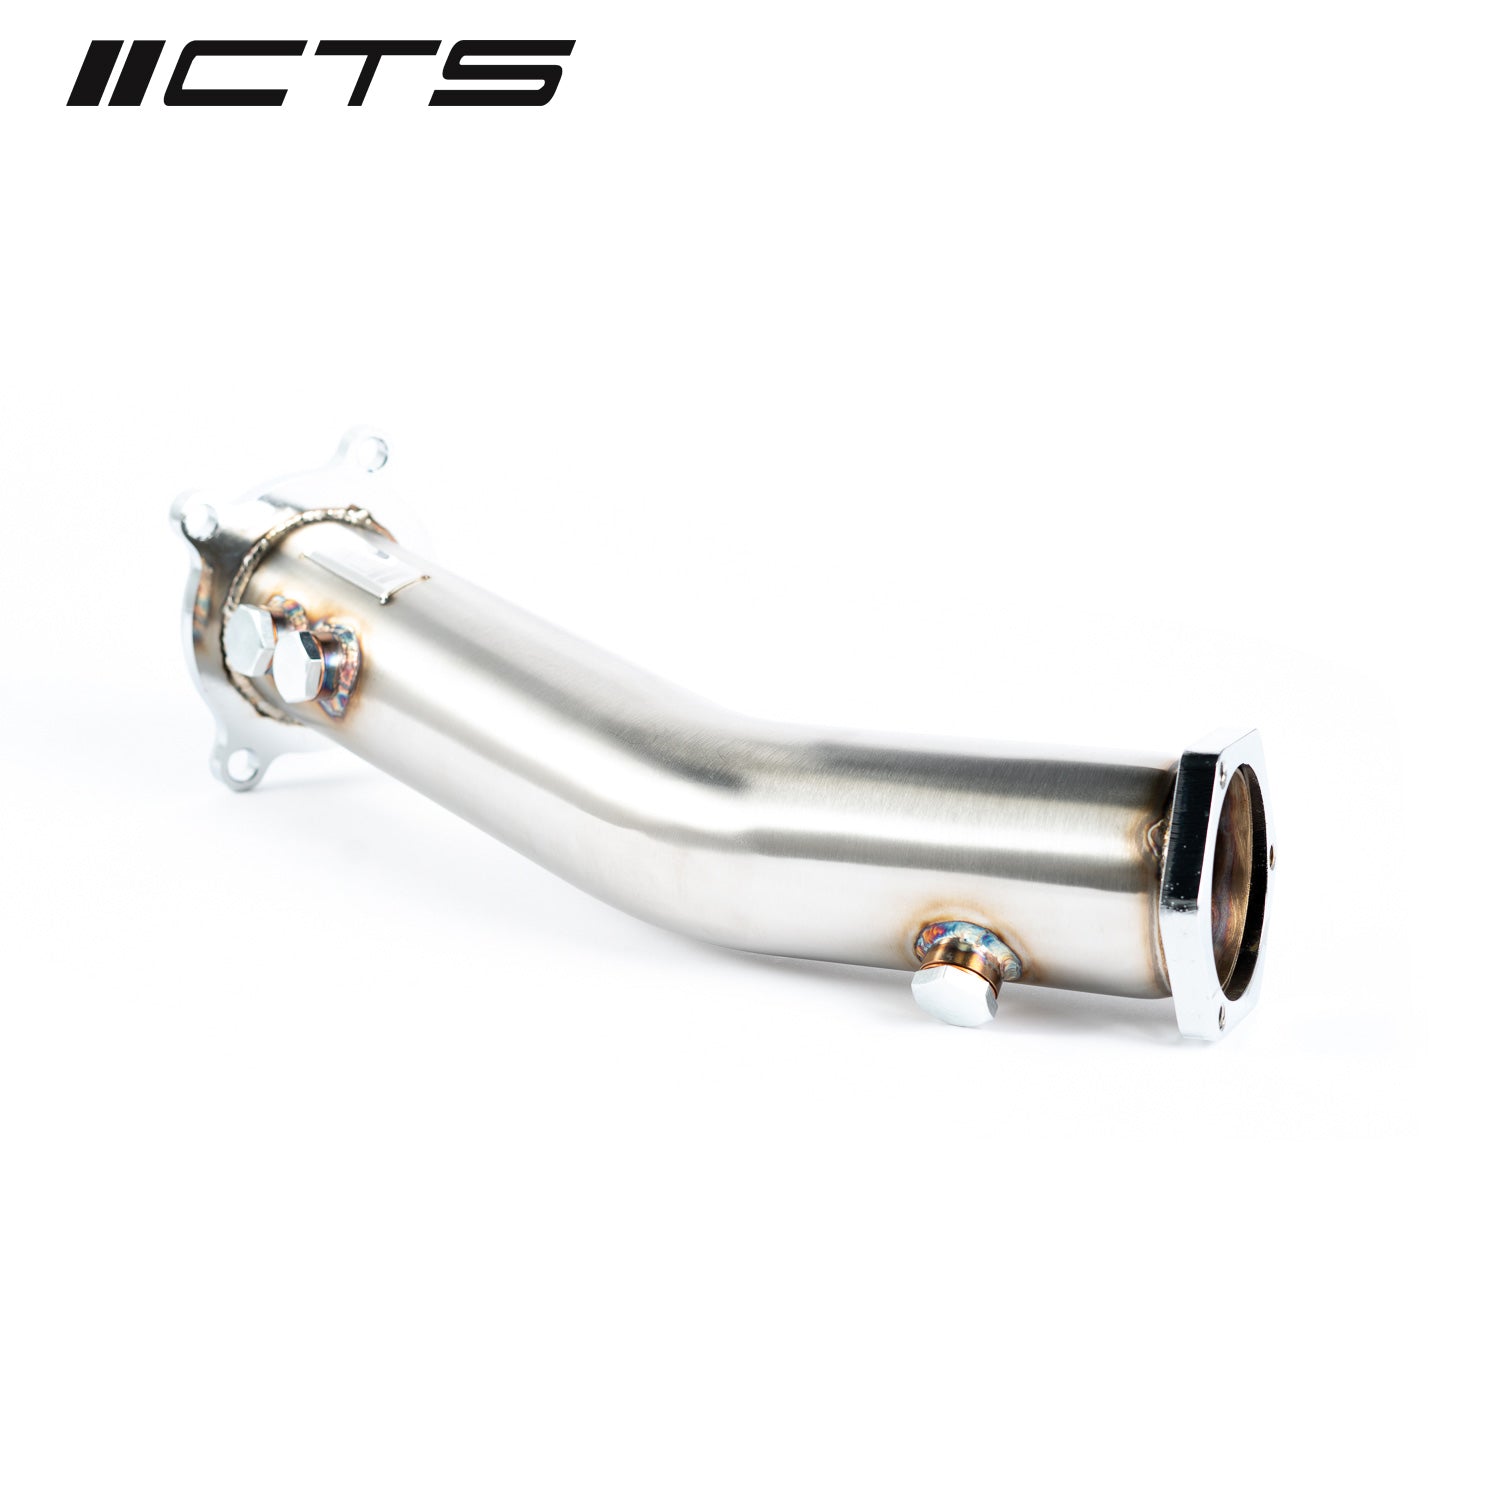 CTS TURBO B7 AUDI A4 2.0T TEST PIPE - 0